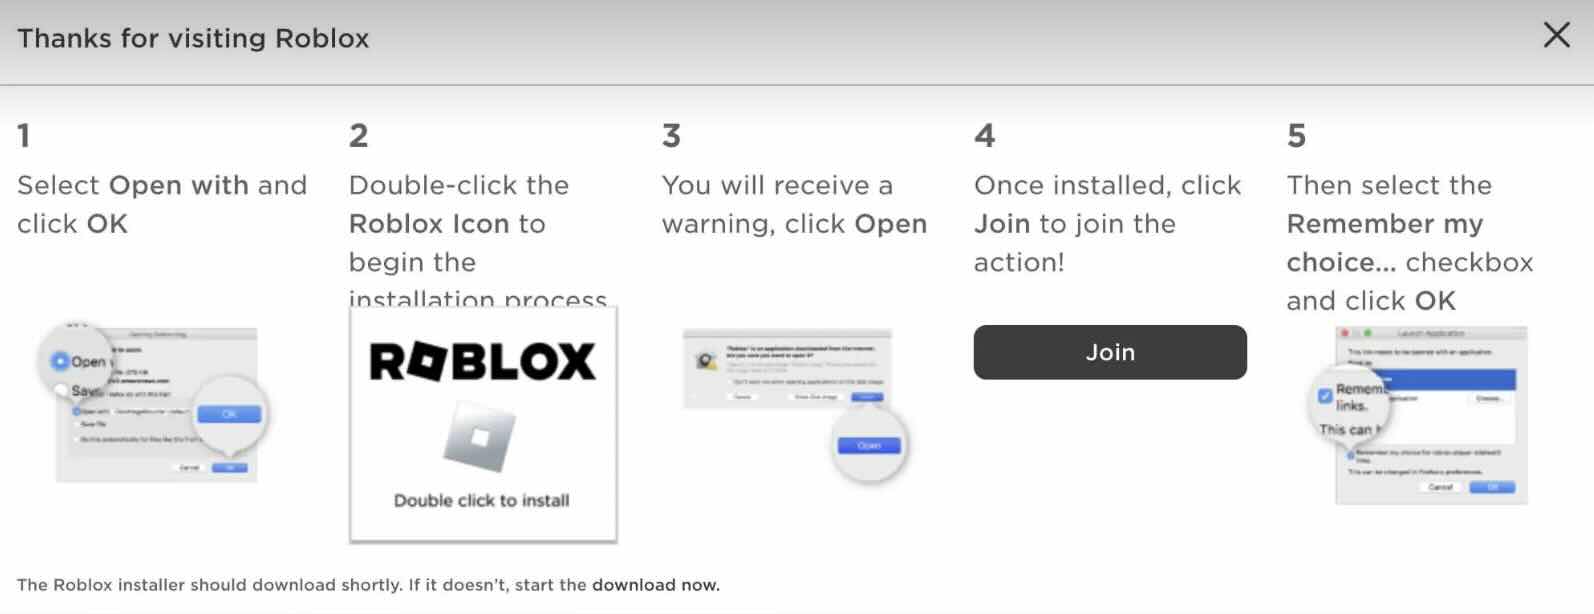 Steps to download and update Roblox on Mac